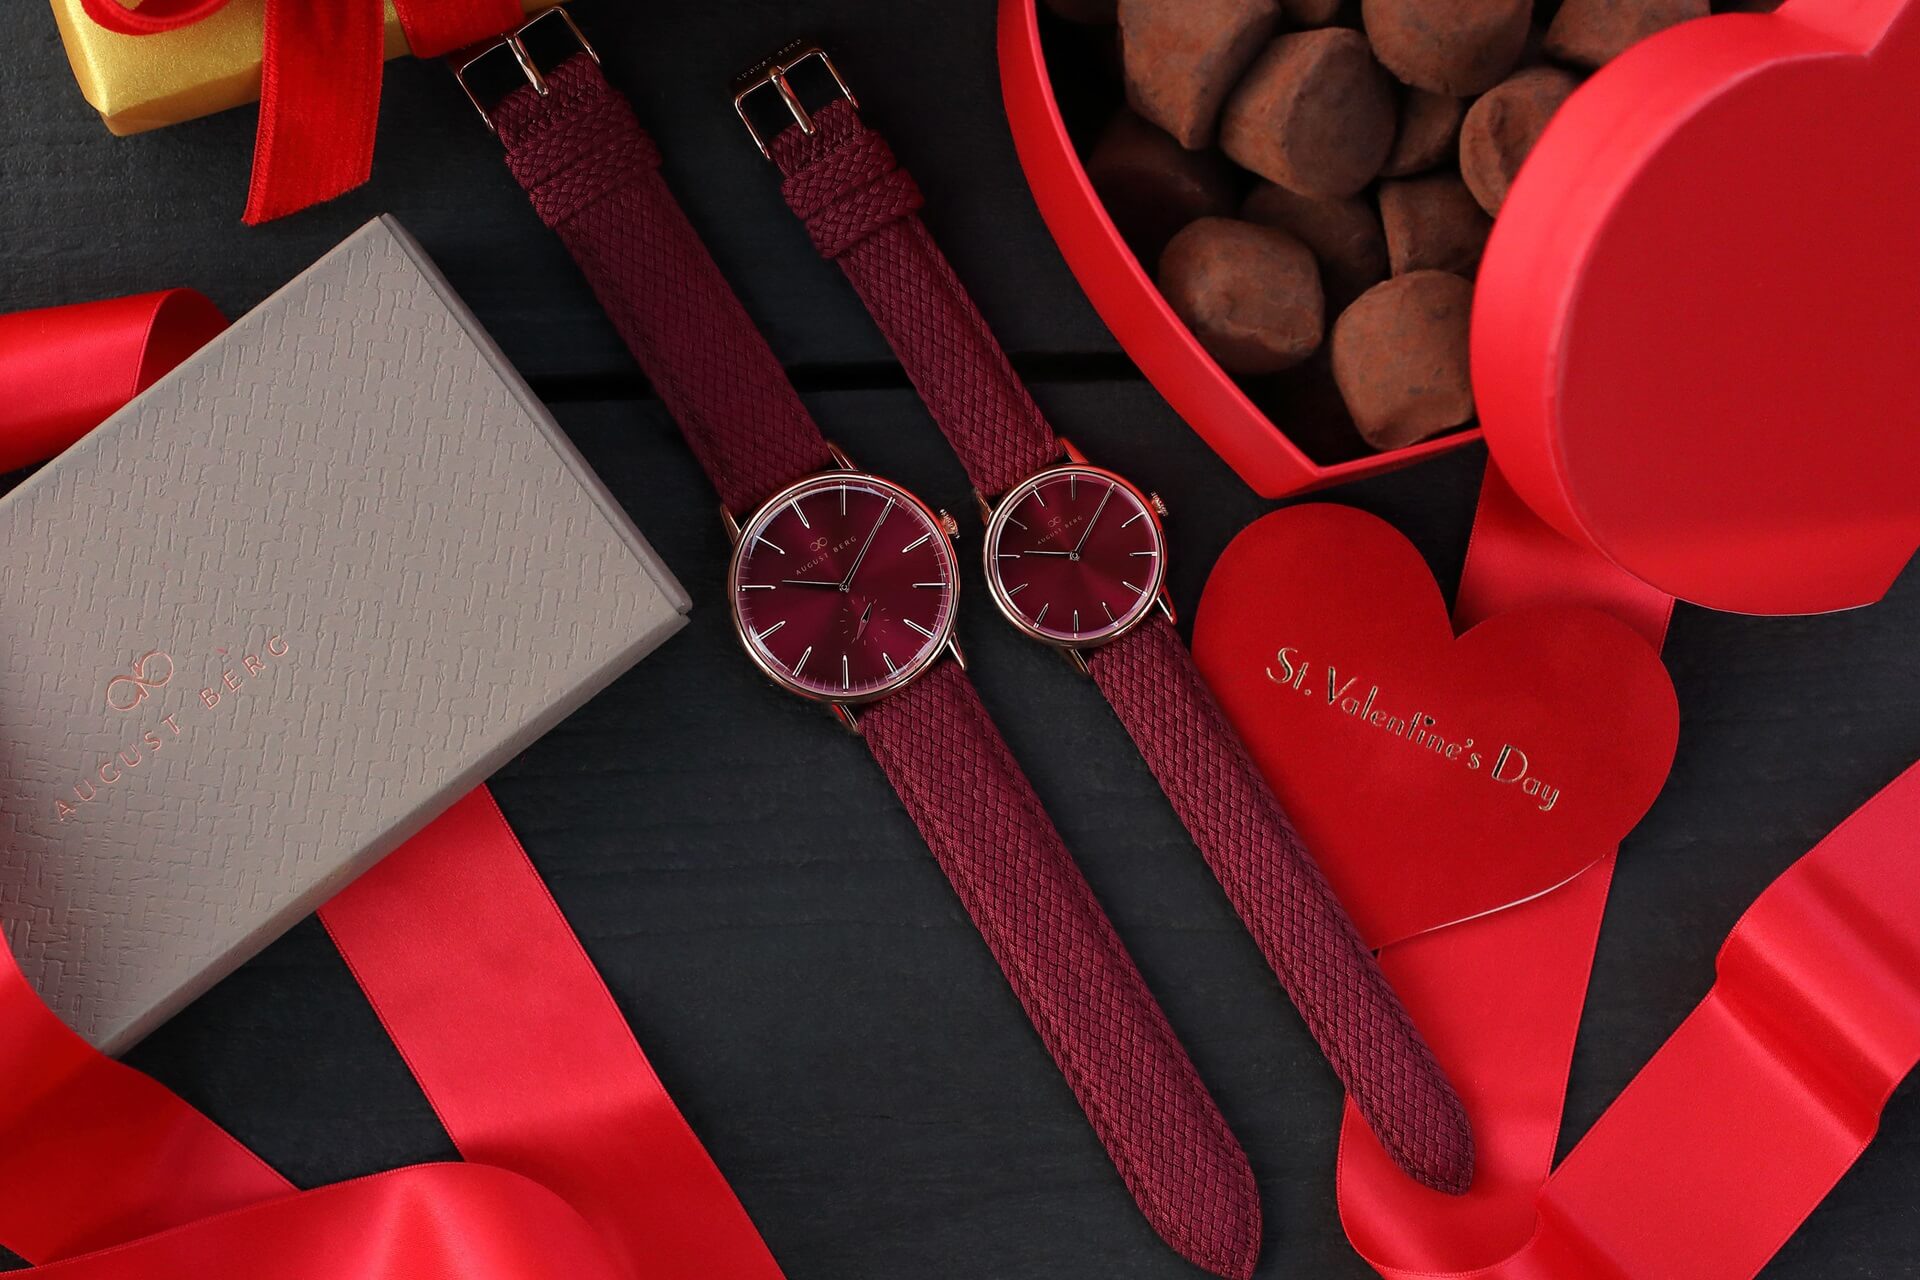 Top 4 Valentine's Day Gifts that Spark Joy and Last a Lifetime